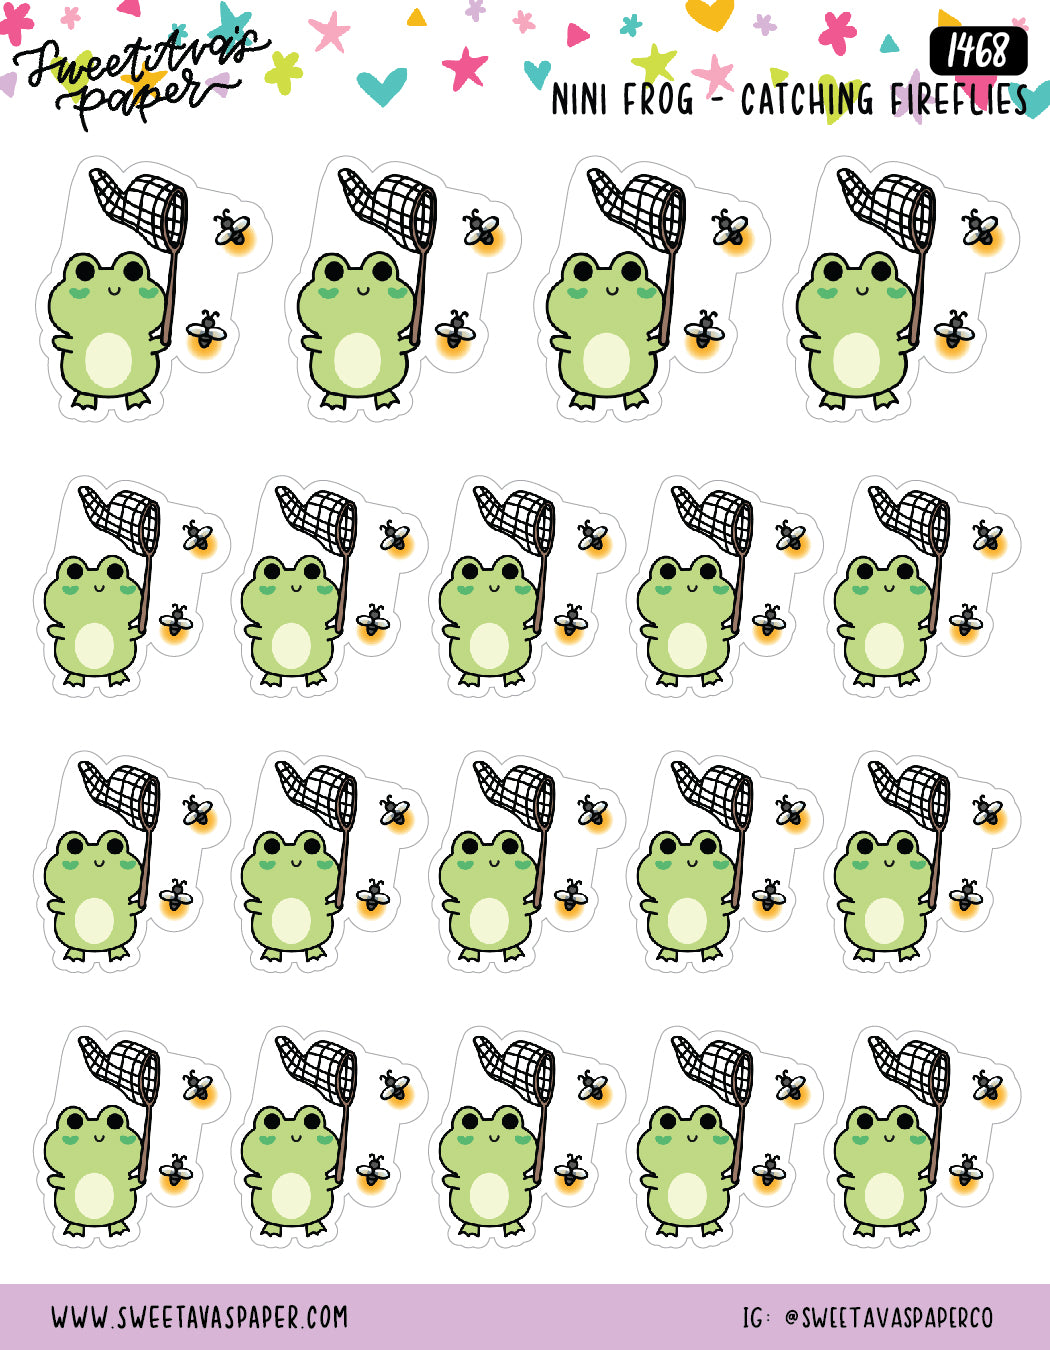 Catching Fireflies - Summer Planner Stickers - Nini Frog [1468]